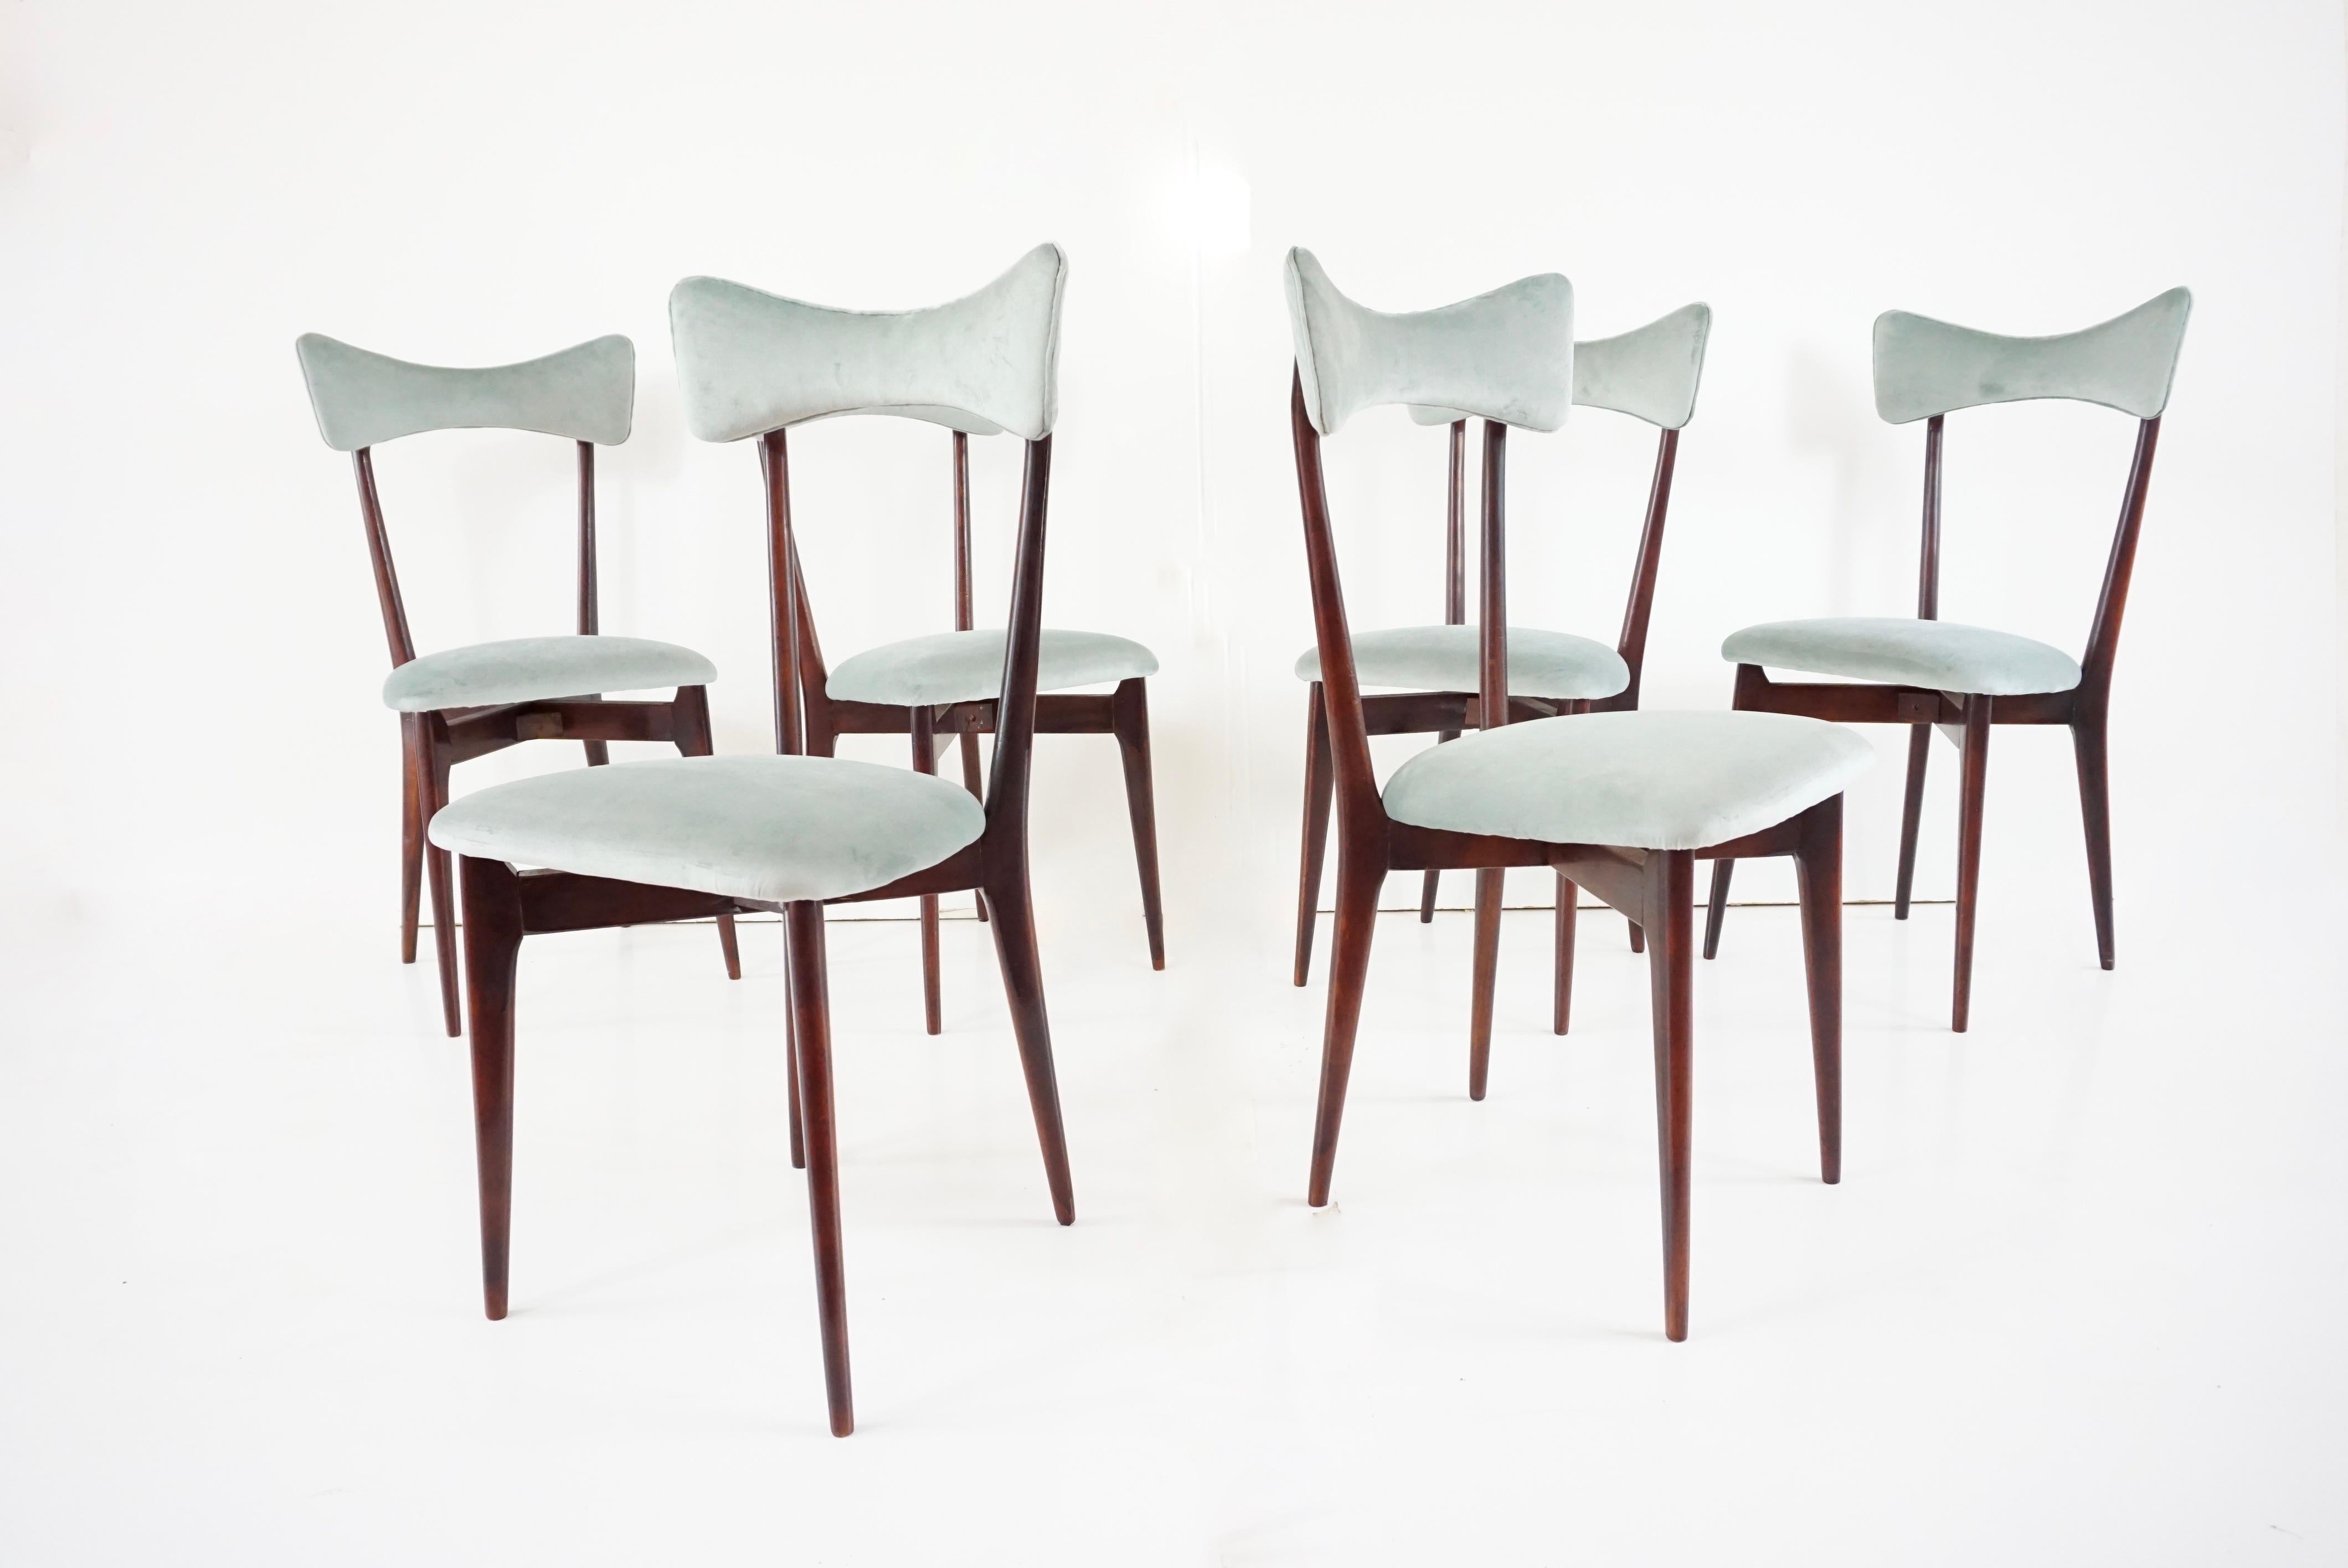 Set of iconic Ico & Luisa Parisi dining chairs
manufactured by Ariberto Colombo, Cantù, circa 1952
this version with a wooden backrest is a later version;
the original version is with a seat pad covered with red synthetic leather then re-upholstery